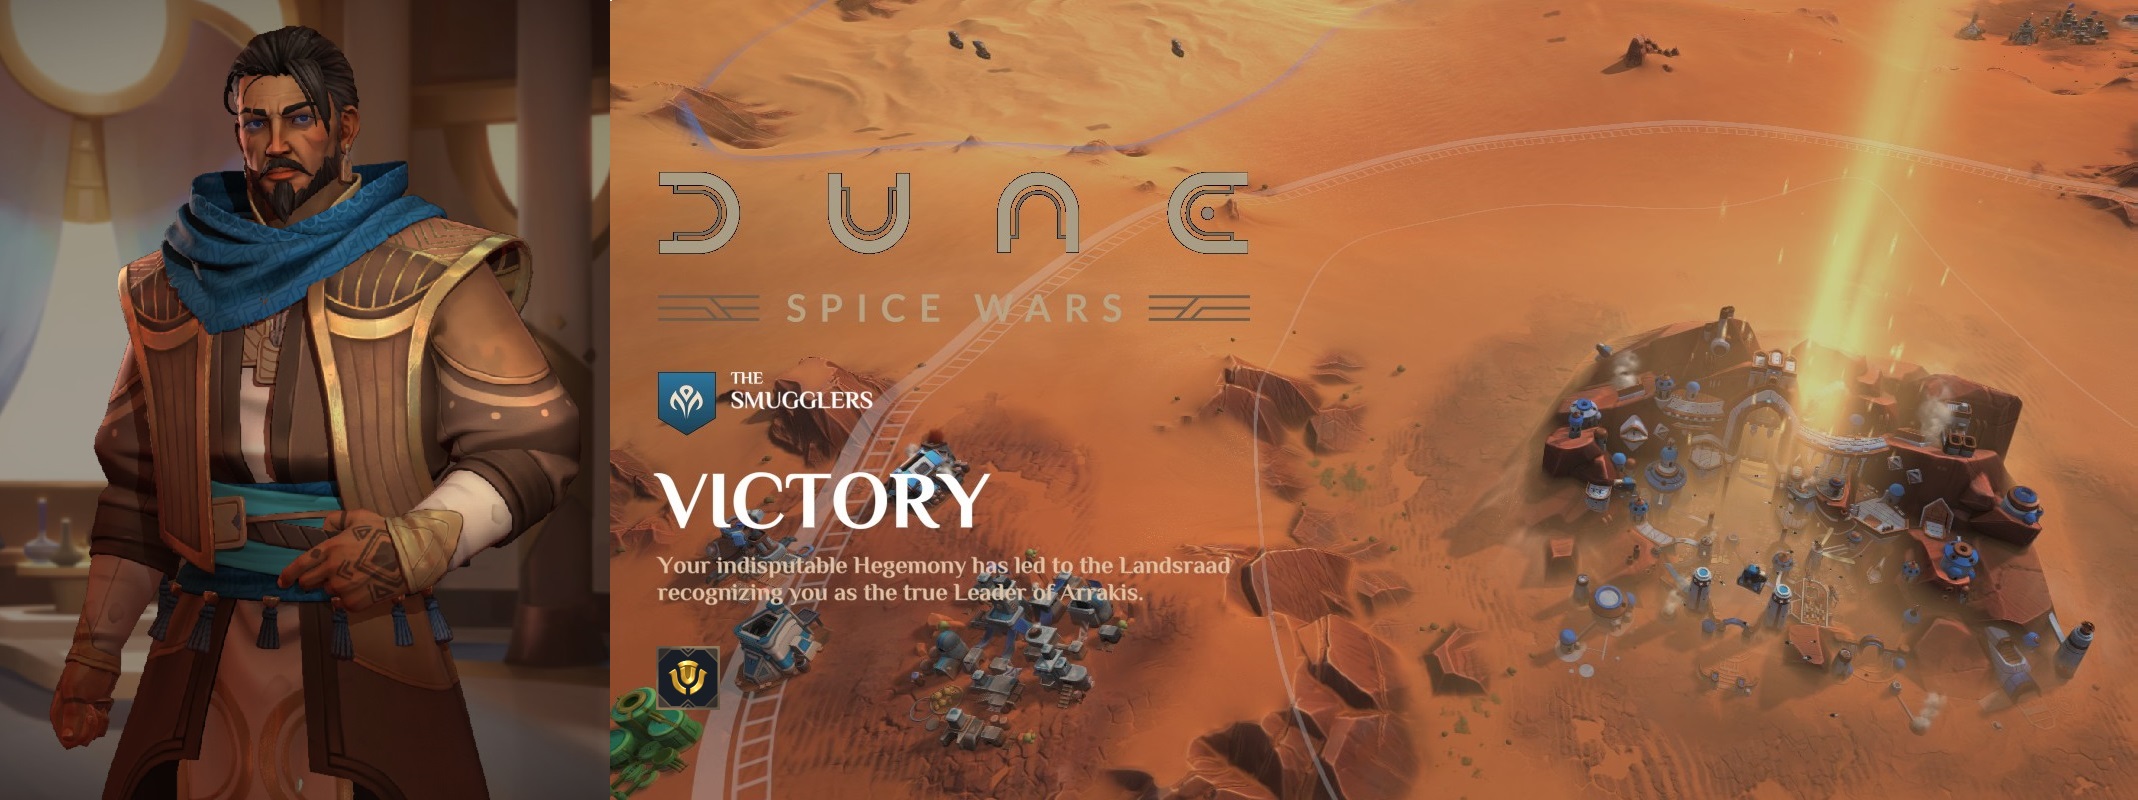 Dune: Spice Wars - A Mentat's guide to Arrakis - The Smugglers - 8D34E72